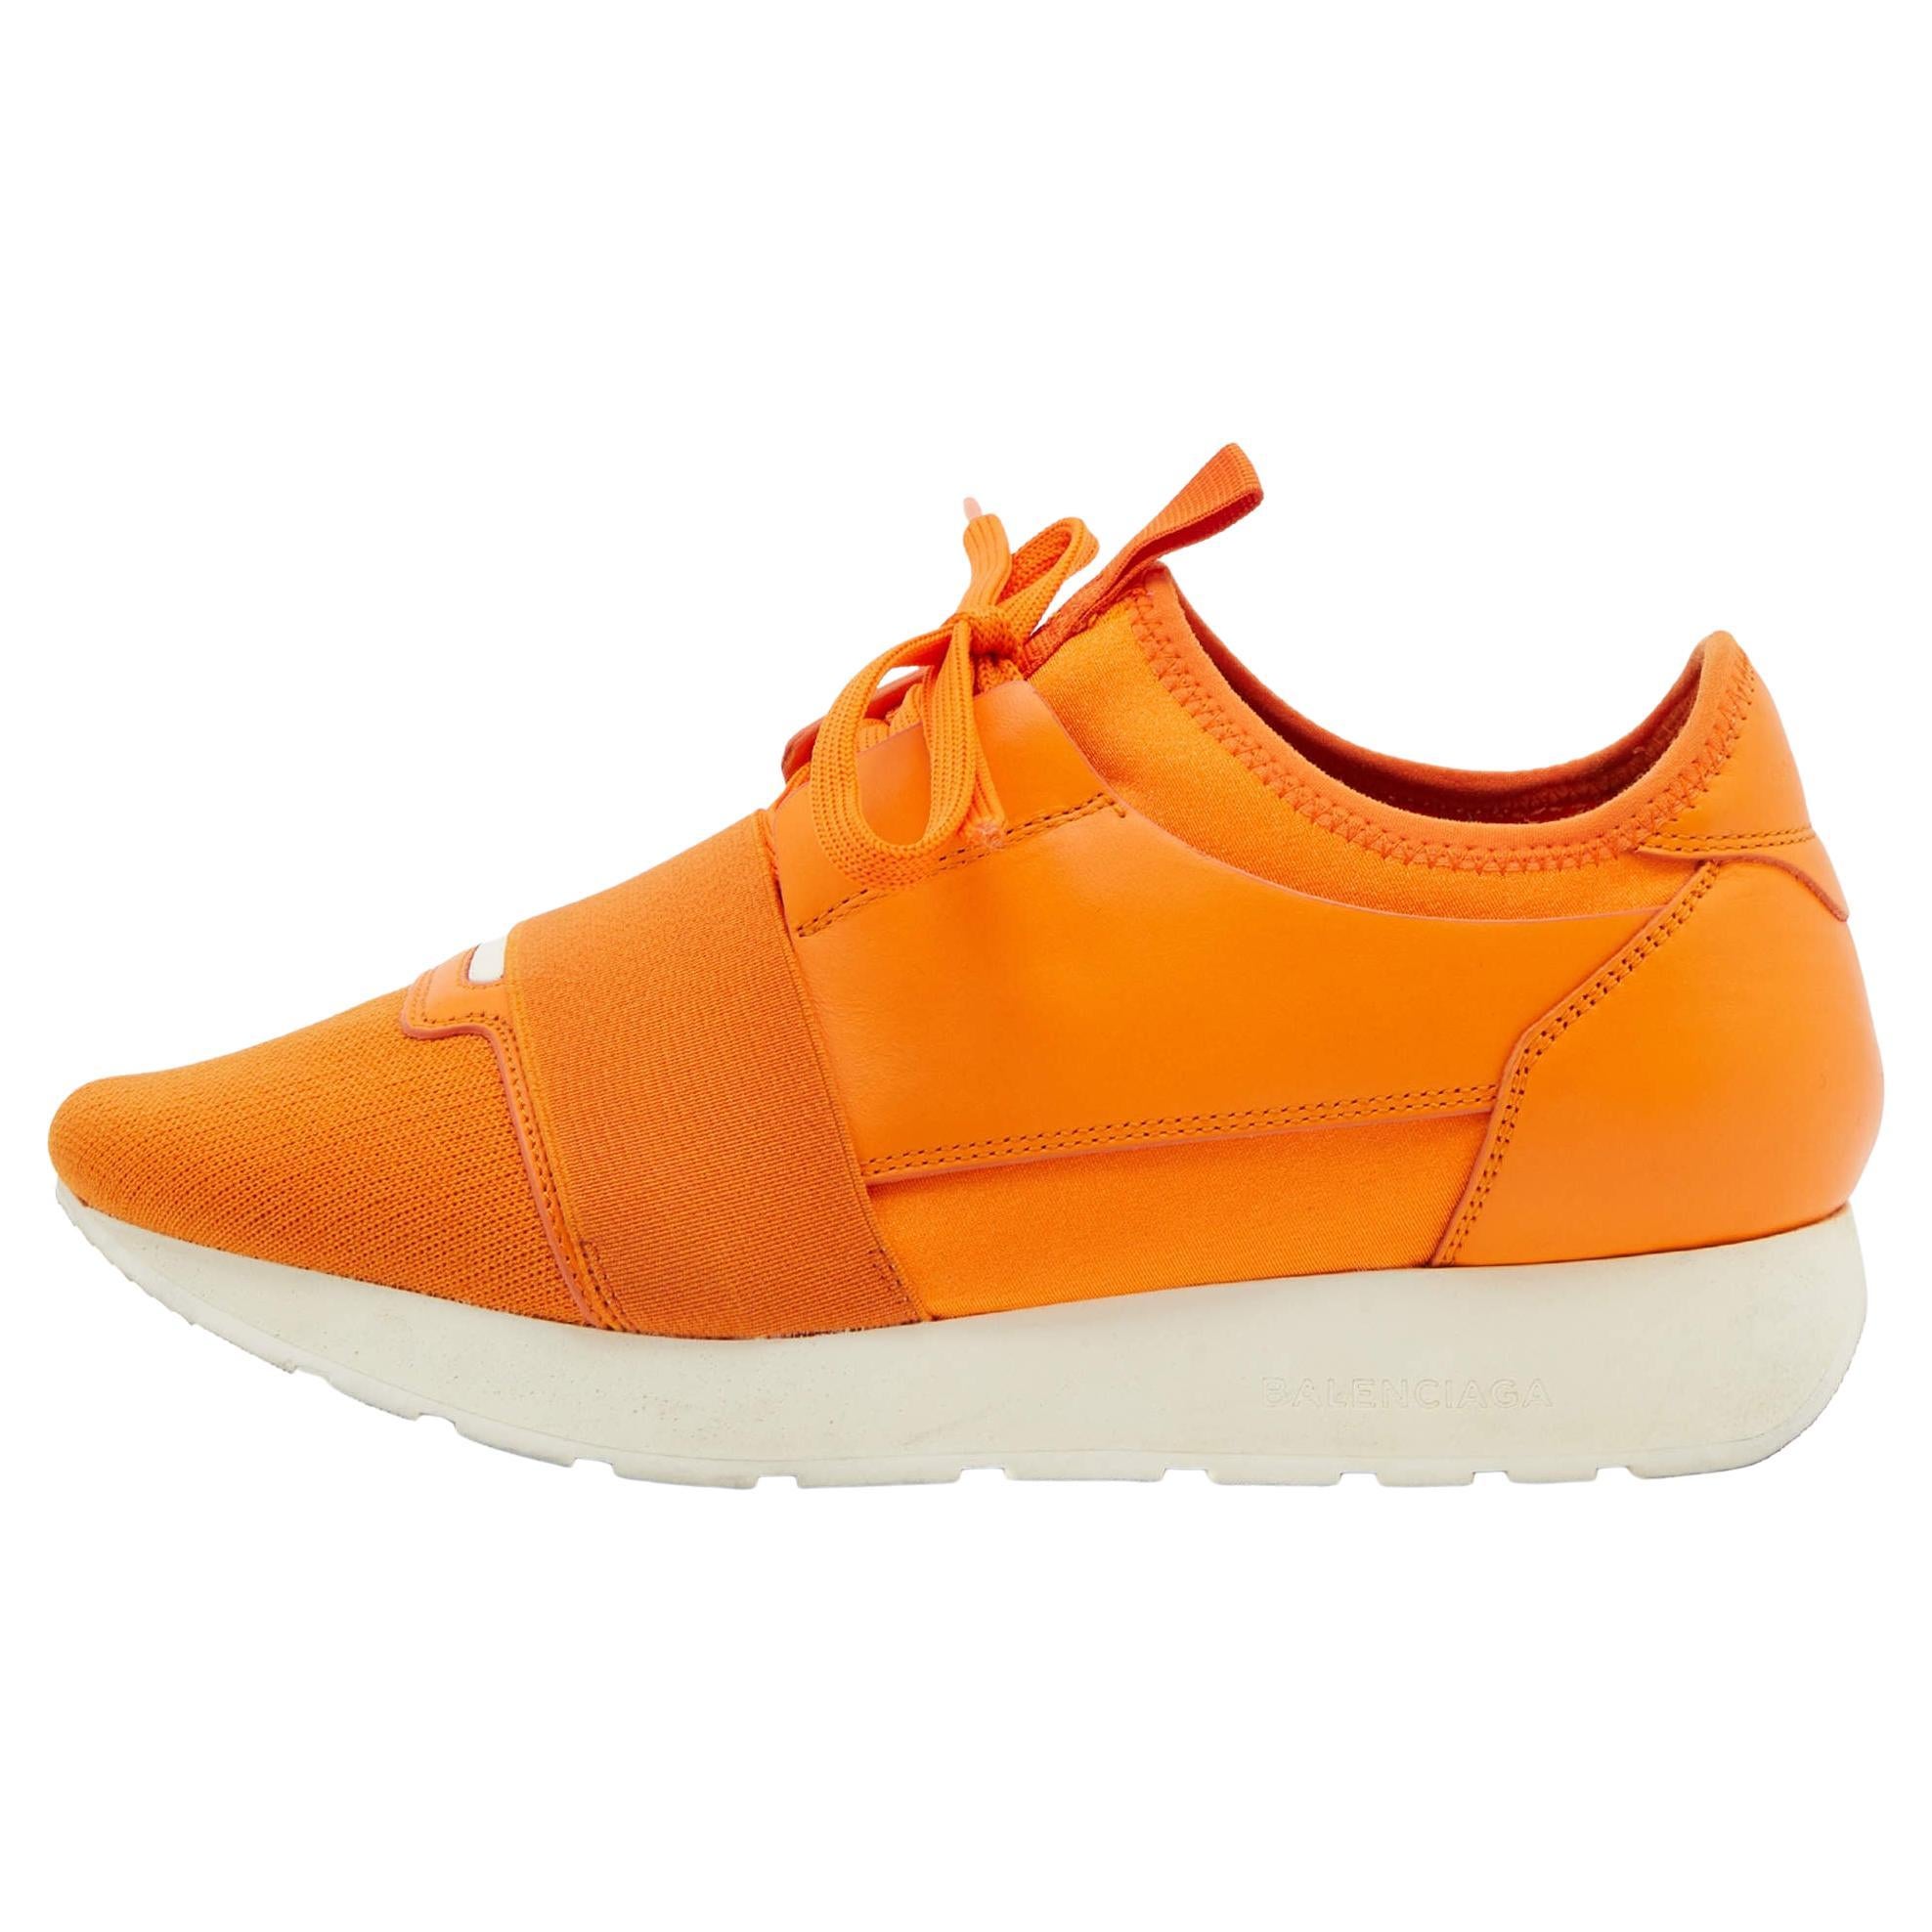 Balenciaga Orange Leather and Mesh Race Runner Sneakers Size 38